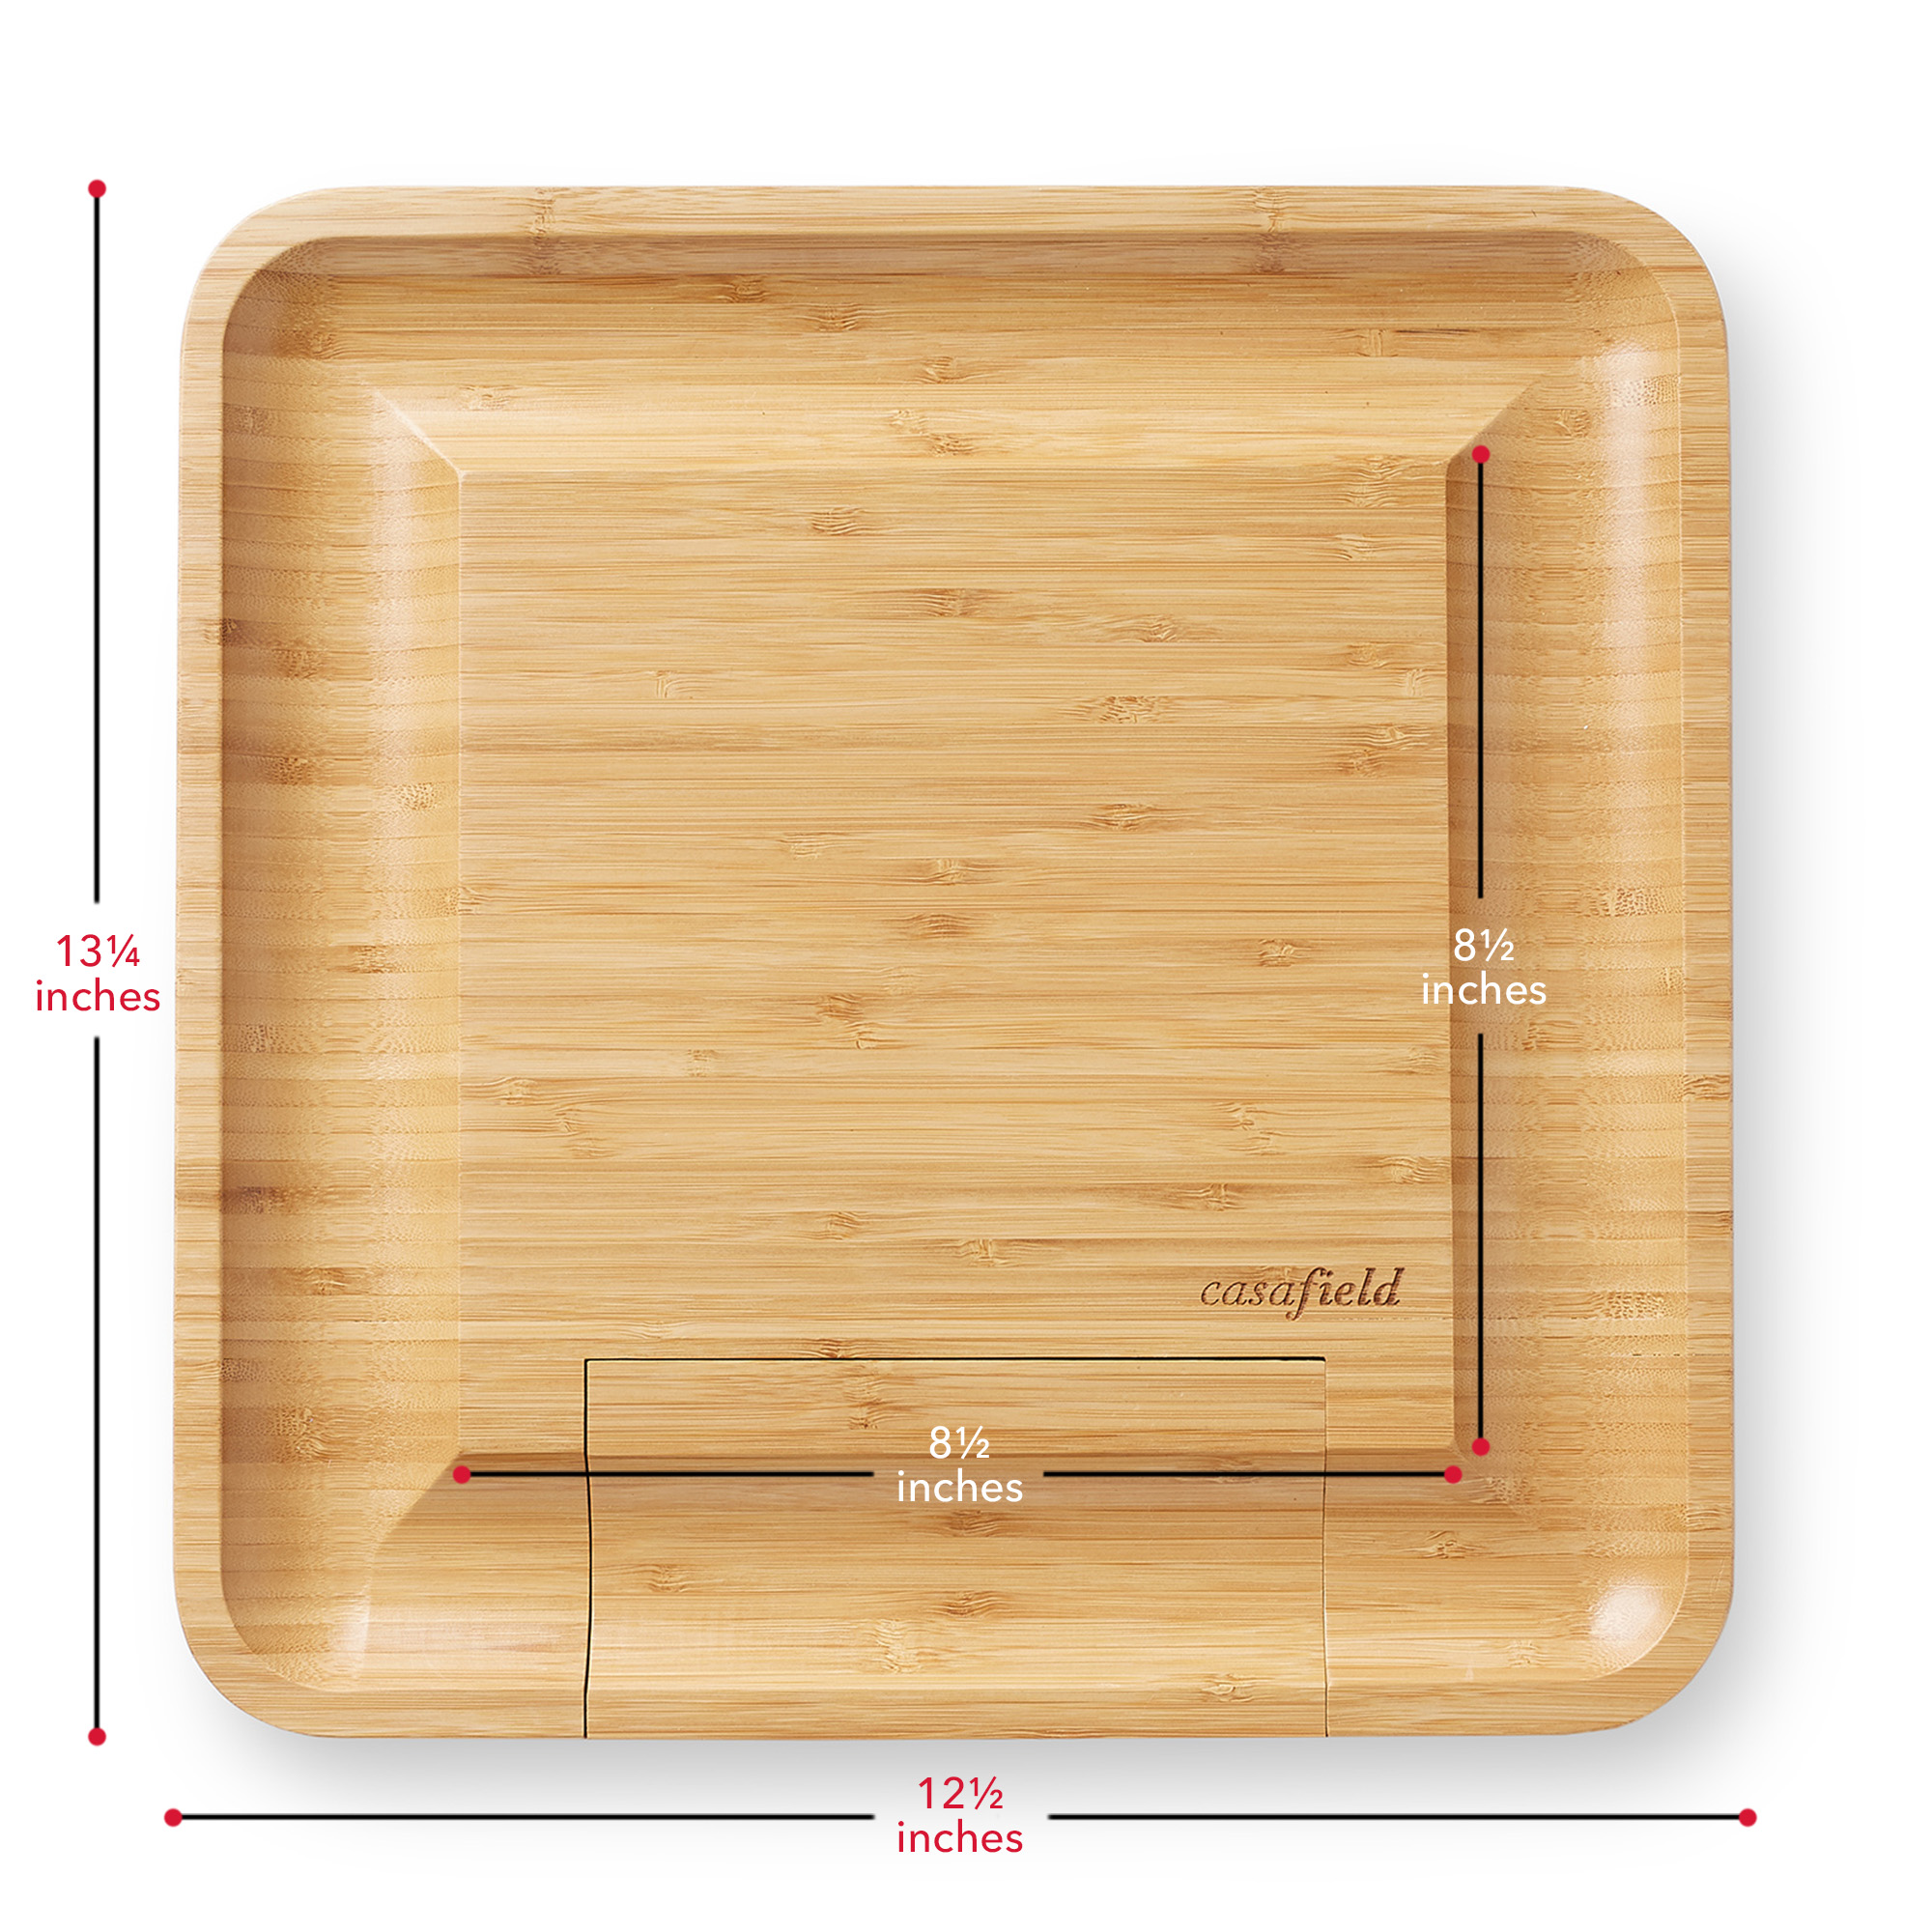 Casafield Organic Bamboo Cheese Cutting Board & Knife Gift Set - Wooden Serving Tray for Charcuterie Meat Platter, Fruit & Crackers - Slide Out Drawer with 4 Stainless Steel Knives - image 3 of 7